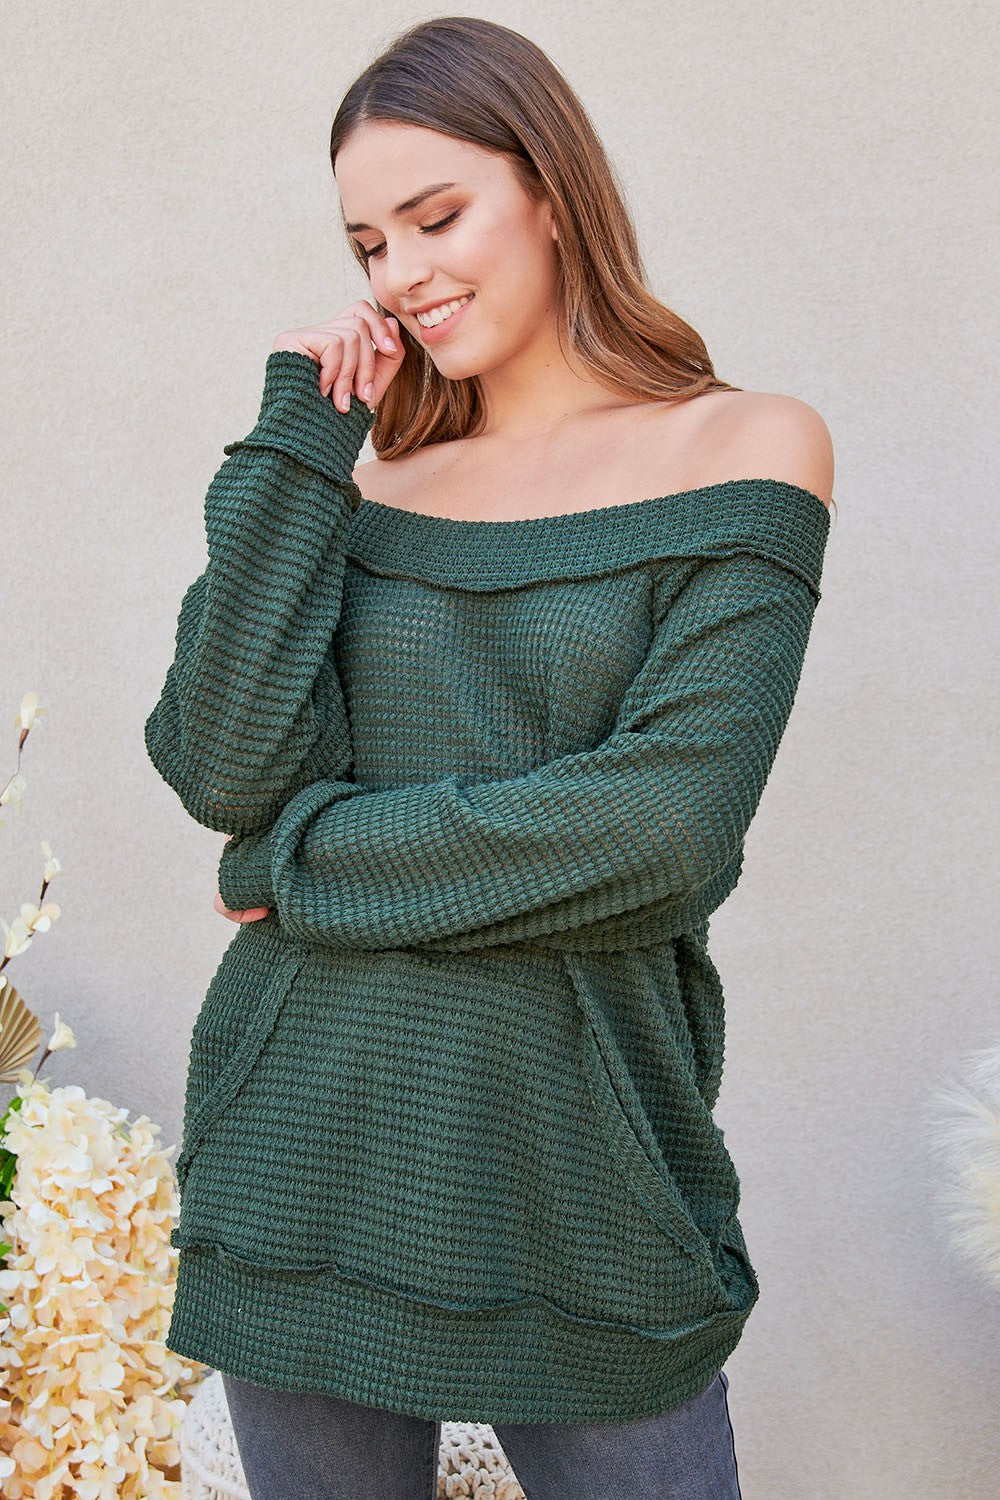 Solid Waffle Knit Fashion Top - Olive